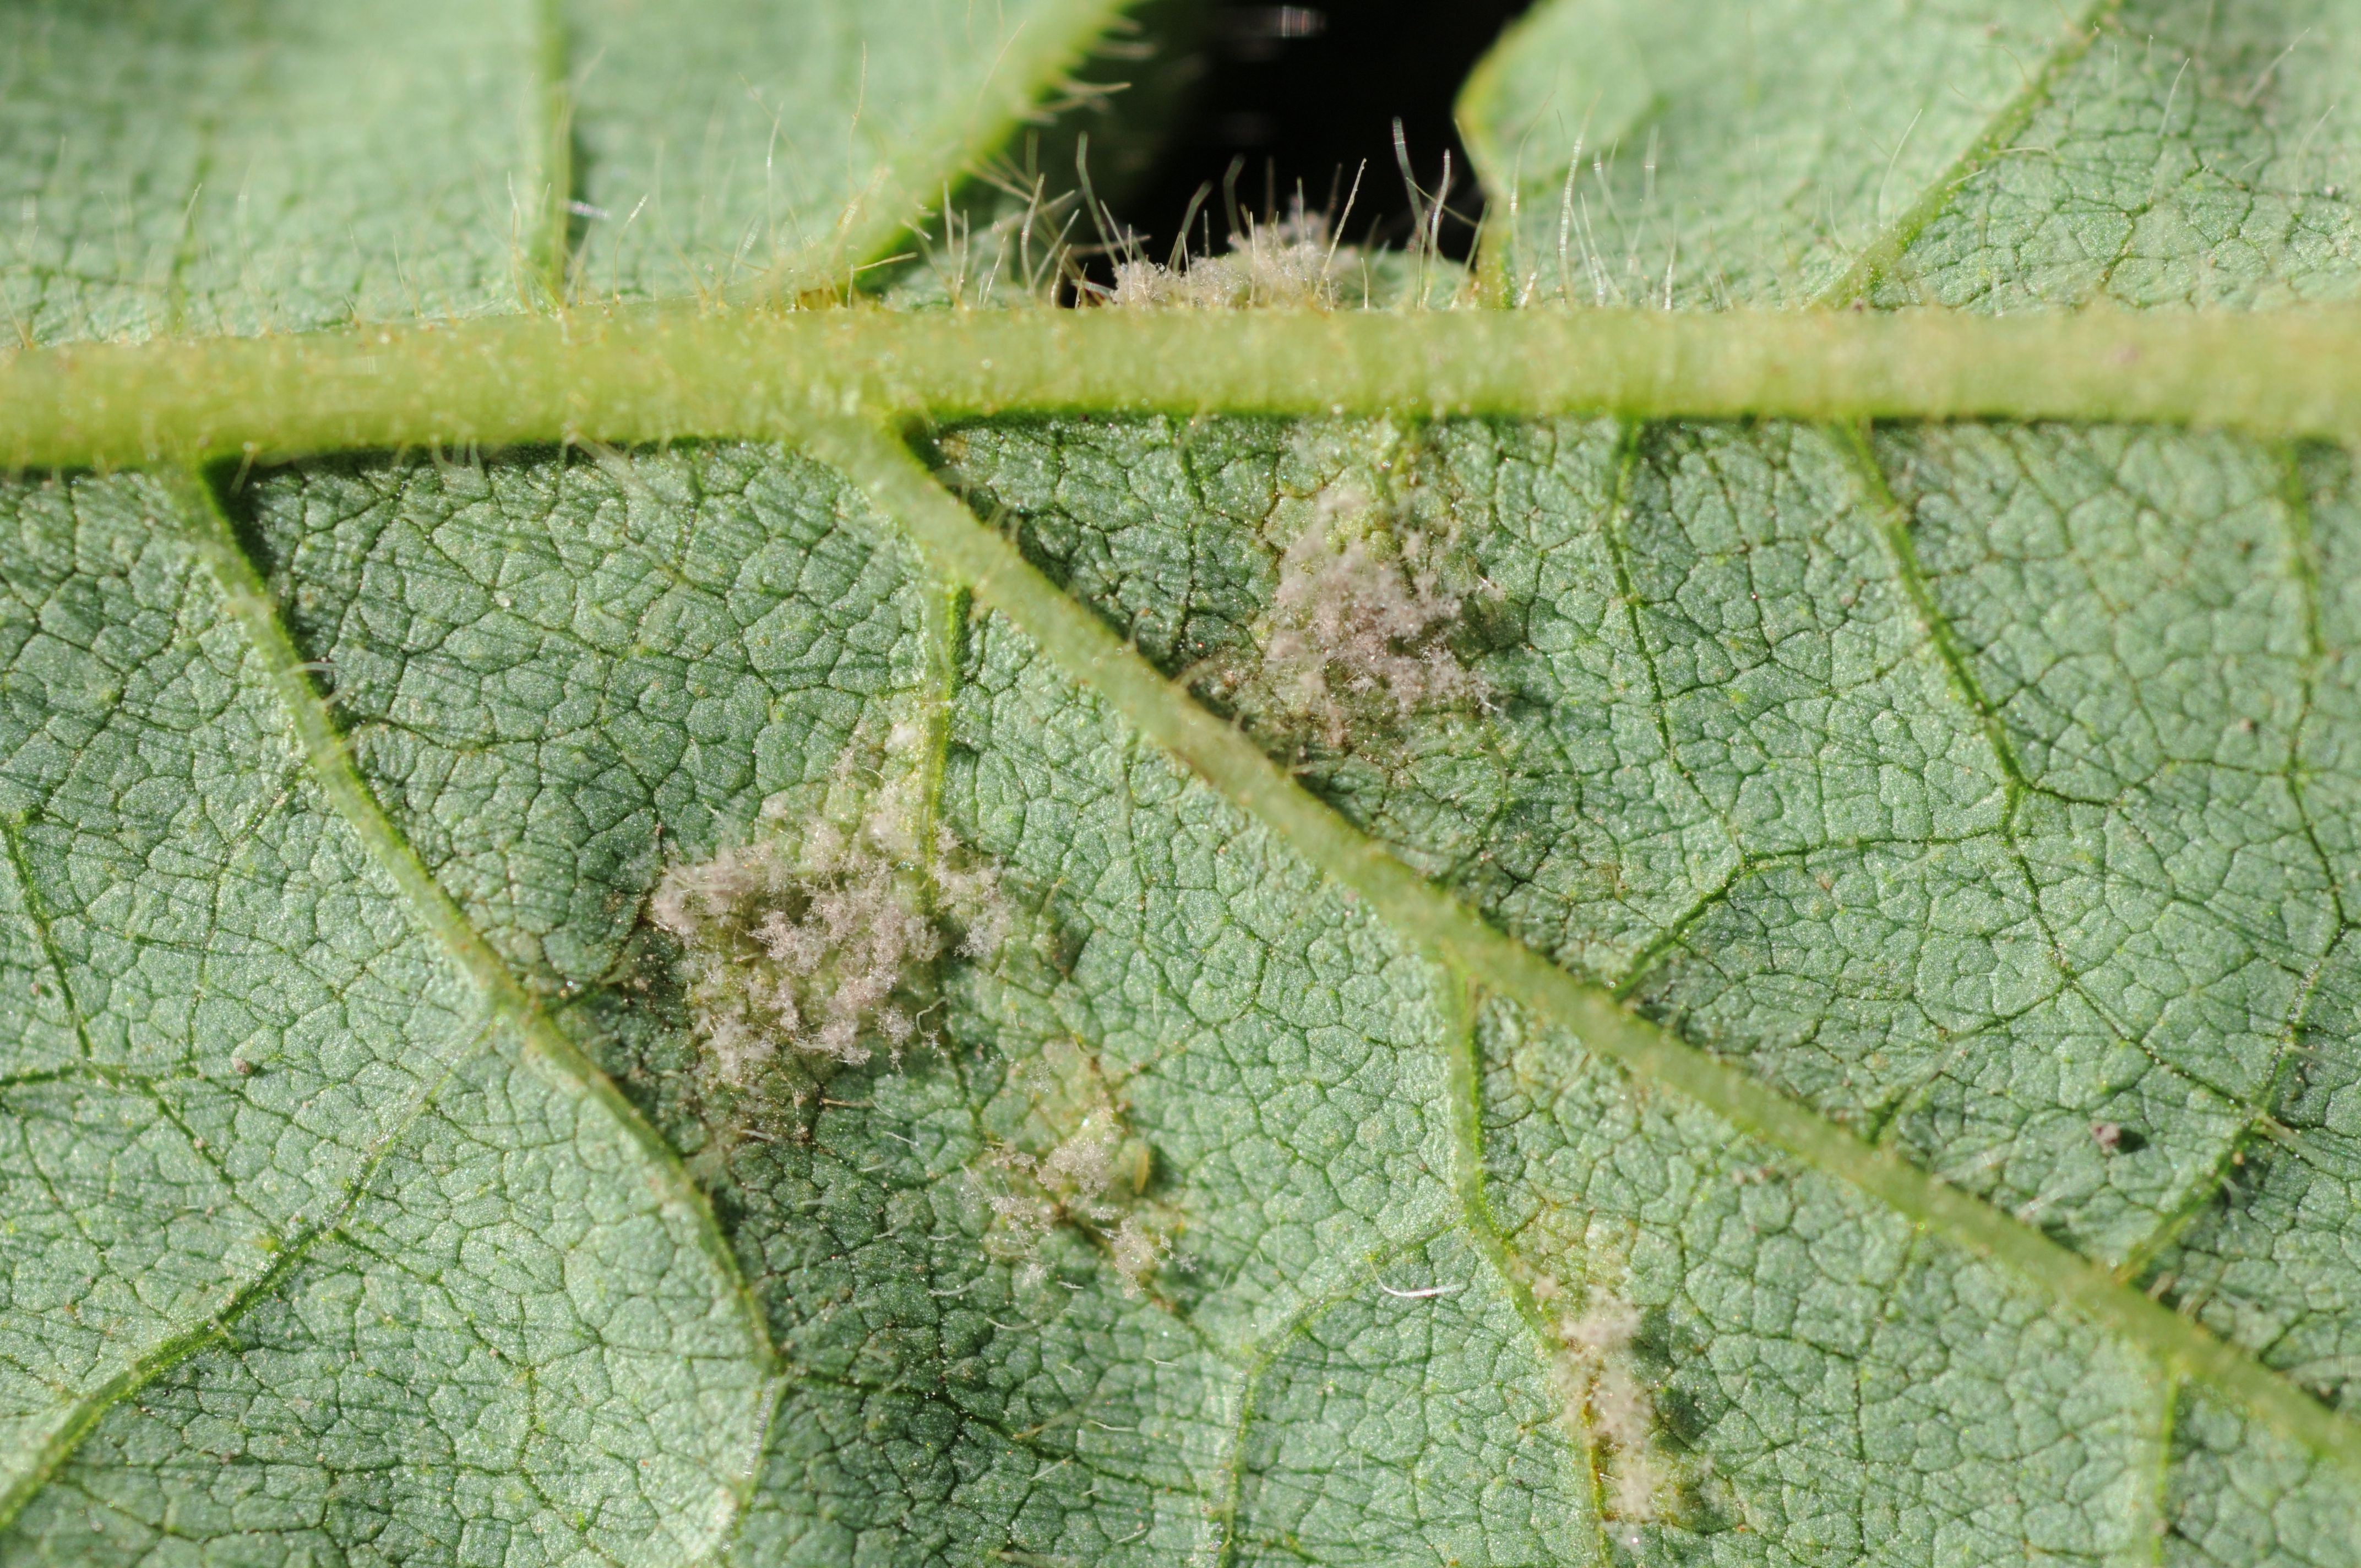 Fuzzy growth characteristic of downy mildew on leaf underside.